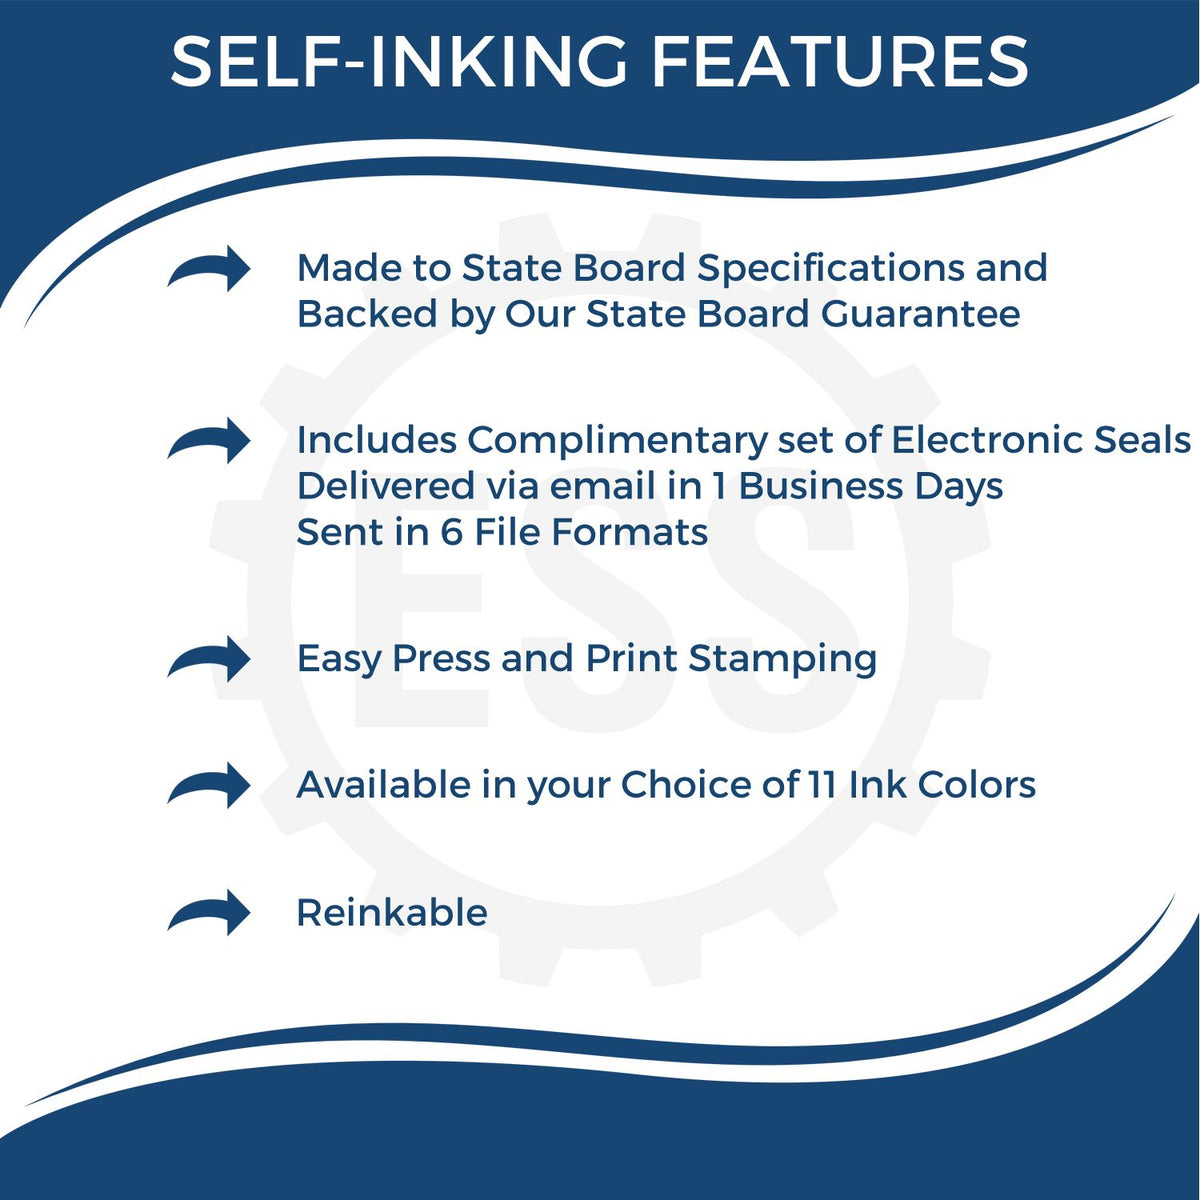 A picture of an infographic highlighting the selling points for the Self-Inking Alabama Landscape Architect Stamp